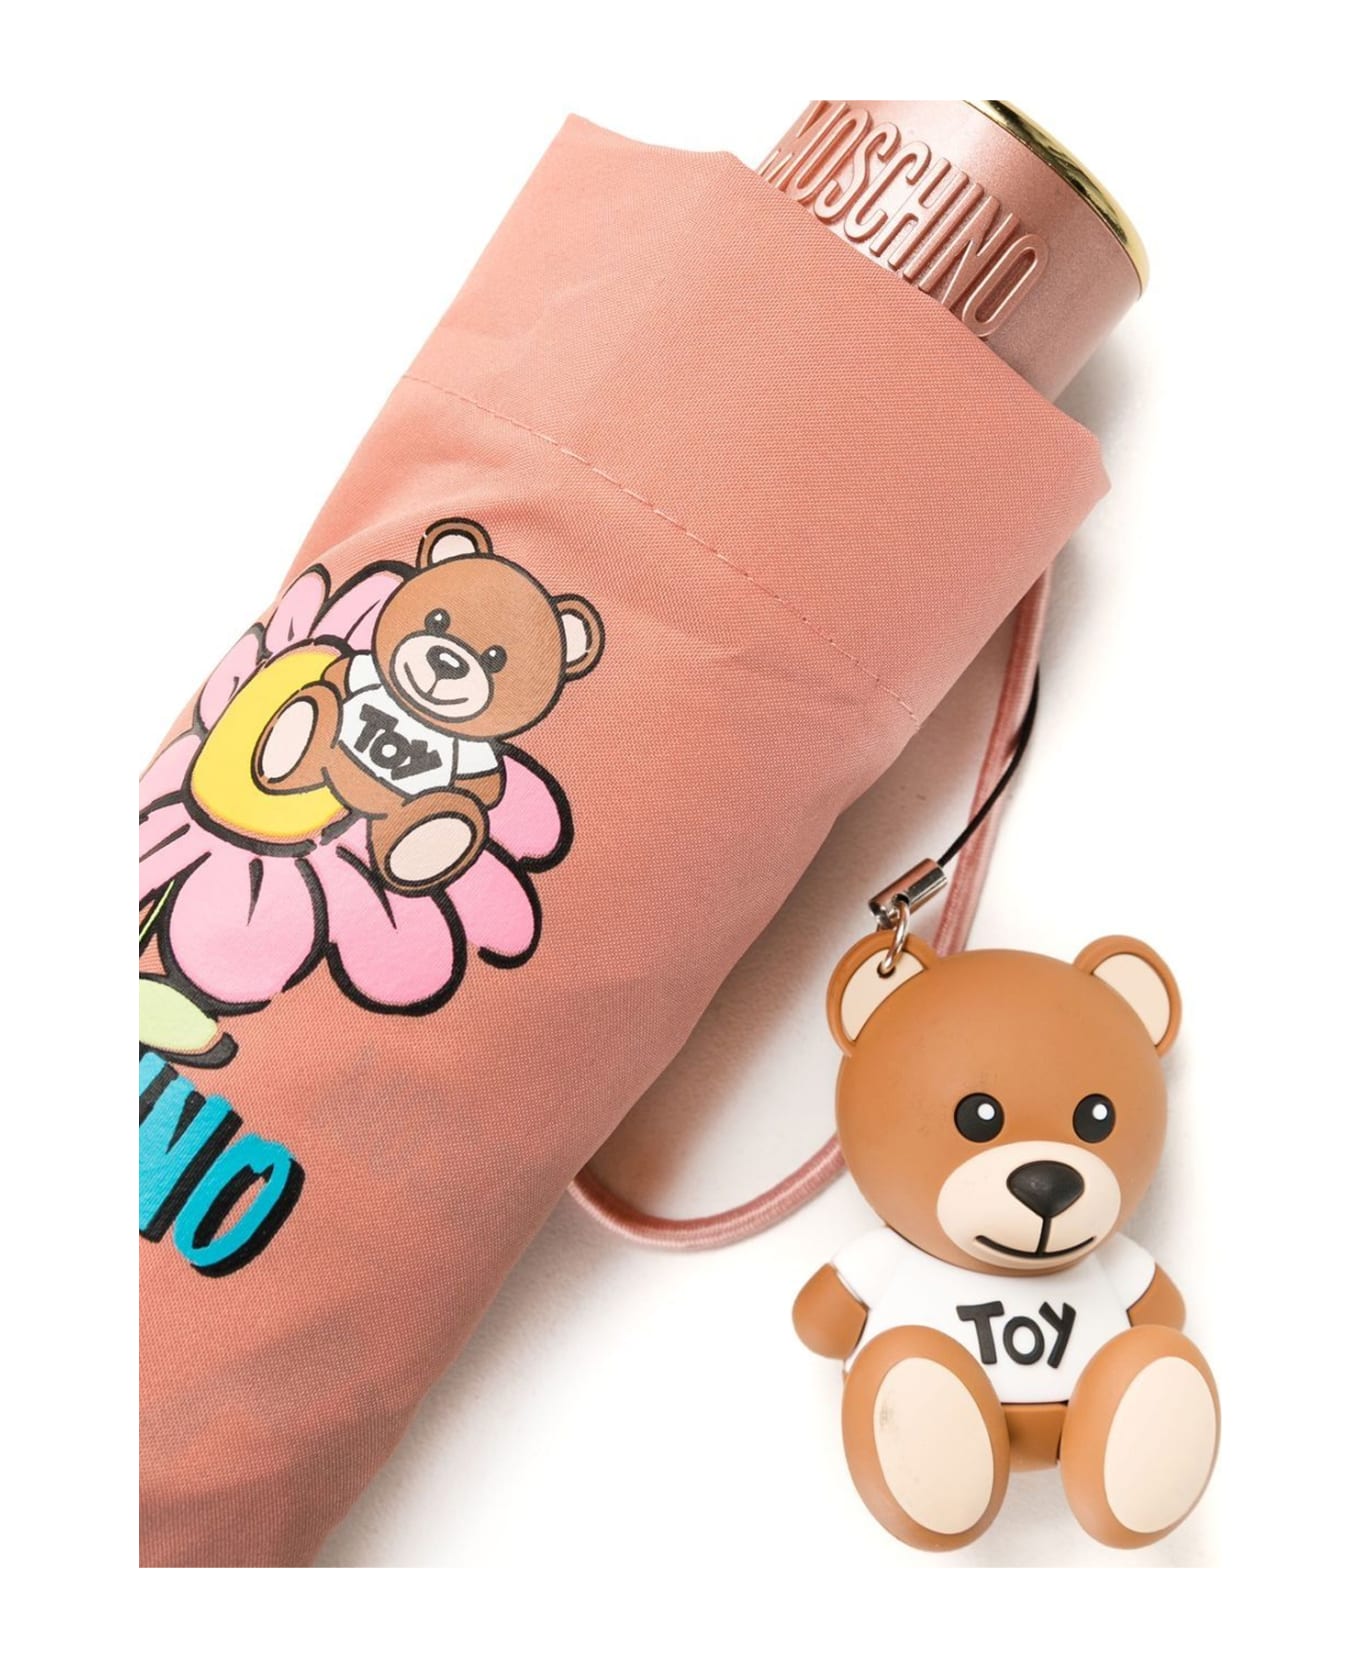 Moschino Flower Bear With Pendant Teddy Supermini Umbrella - We partner with Italys best luxury retailers and work together with them to provide you